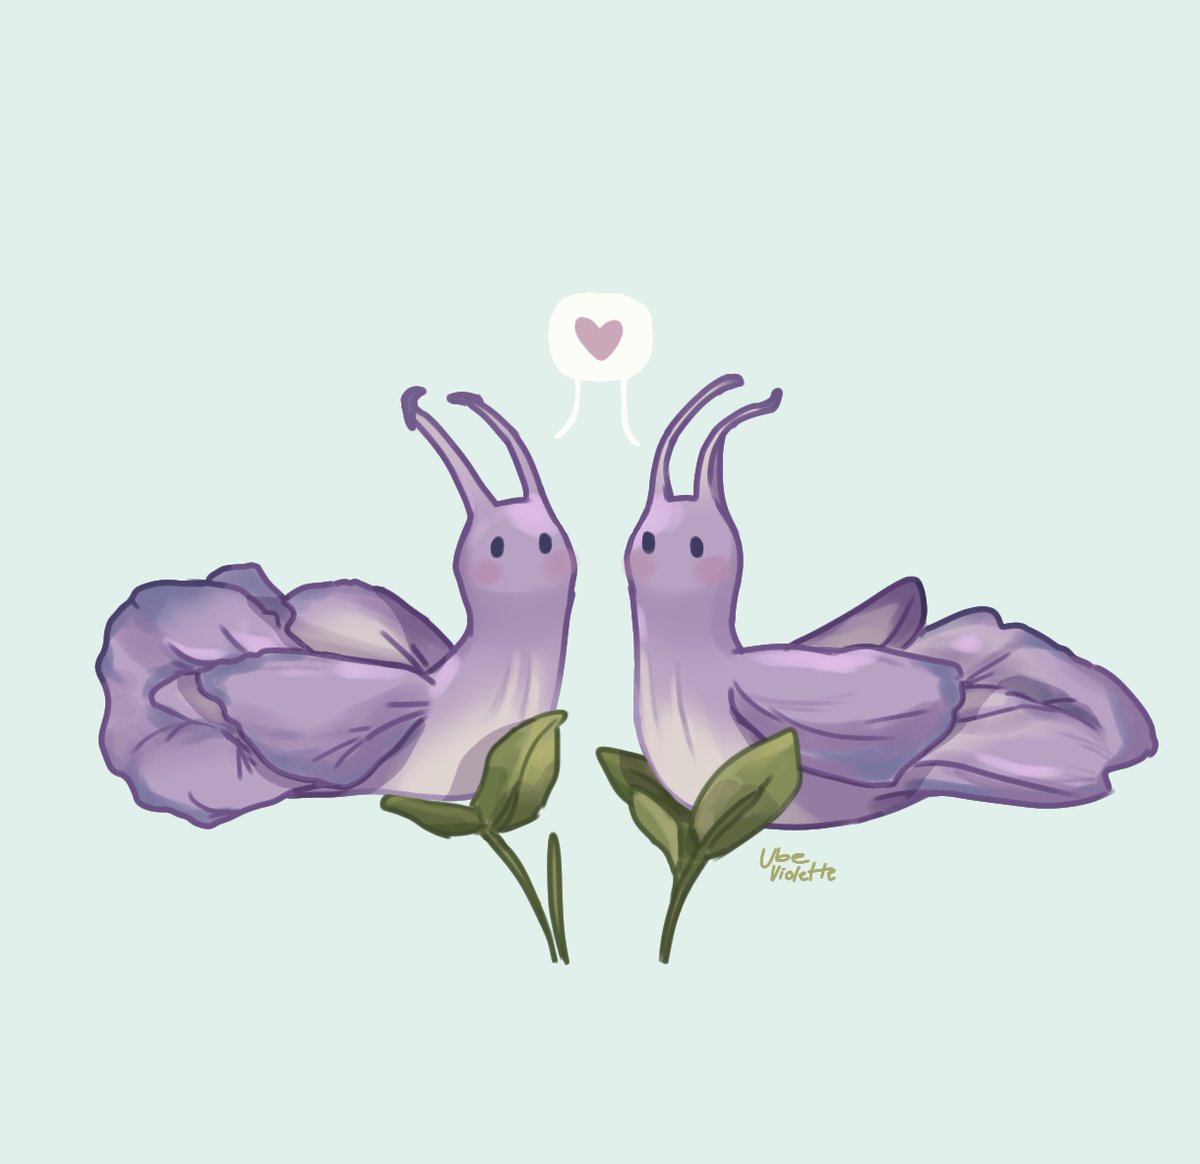 「LOVER SNAILS REINCARNATED AS FLOWERS!!! 」|violetteのイラスト